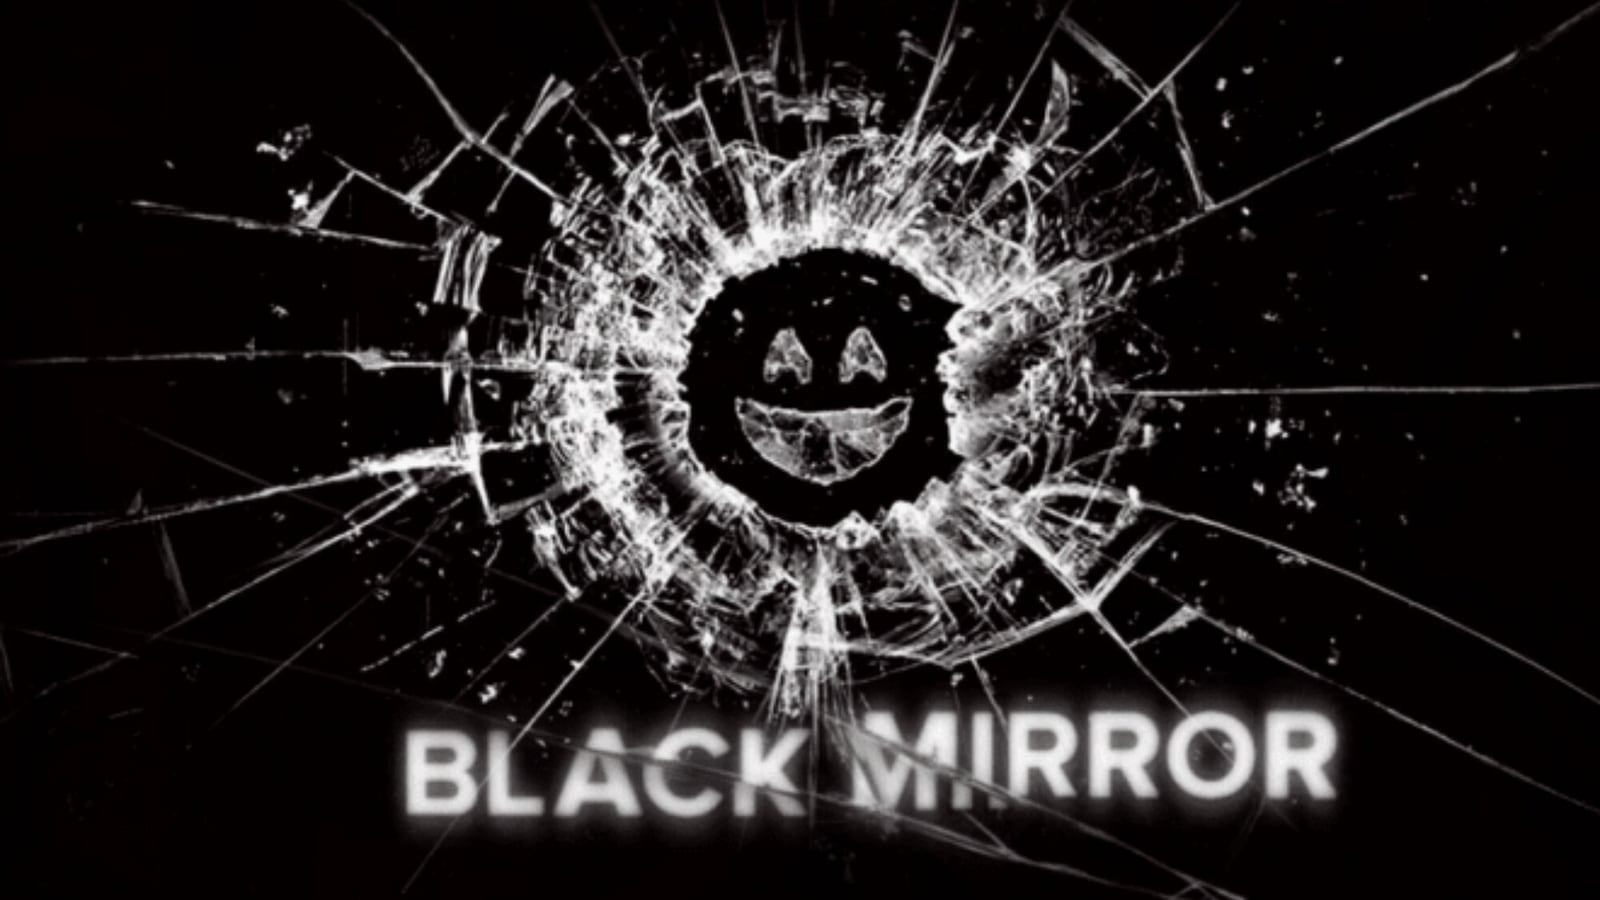 Black Mirror- Experience a thought-provoking journey! 'Black Mirror,' the British sci-fi anthology, delves into humanity's relationship with technology in a chilling yet compelling way.